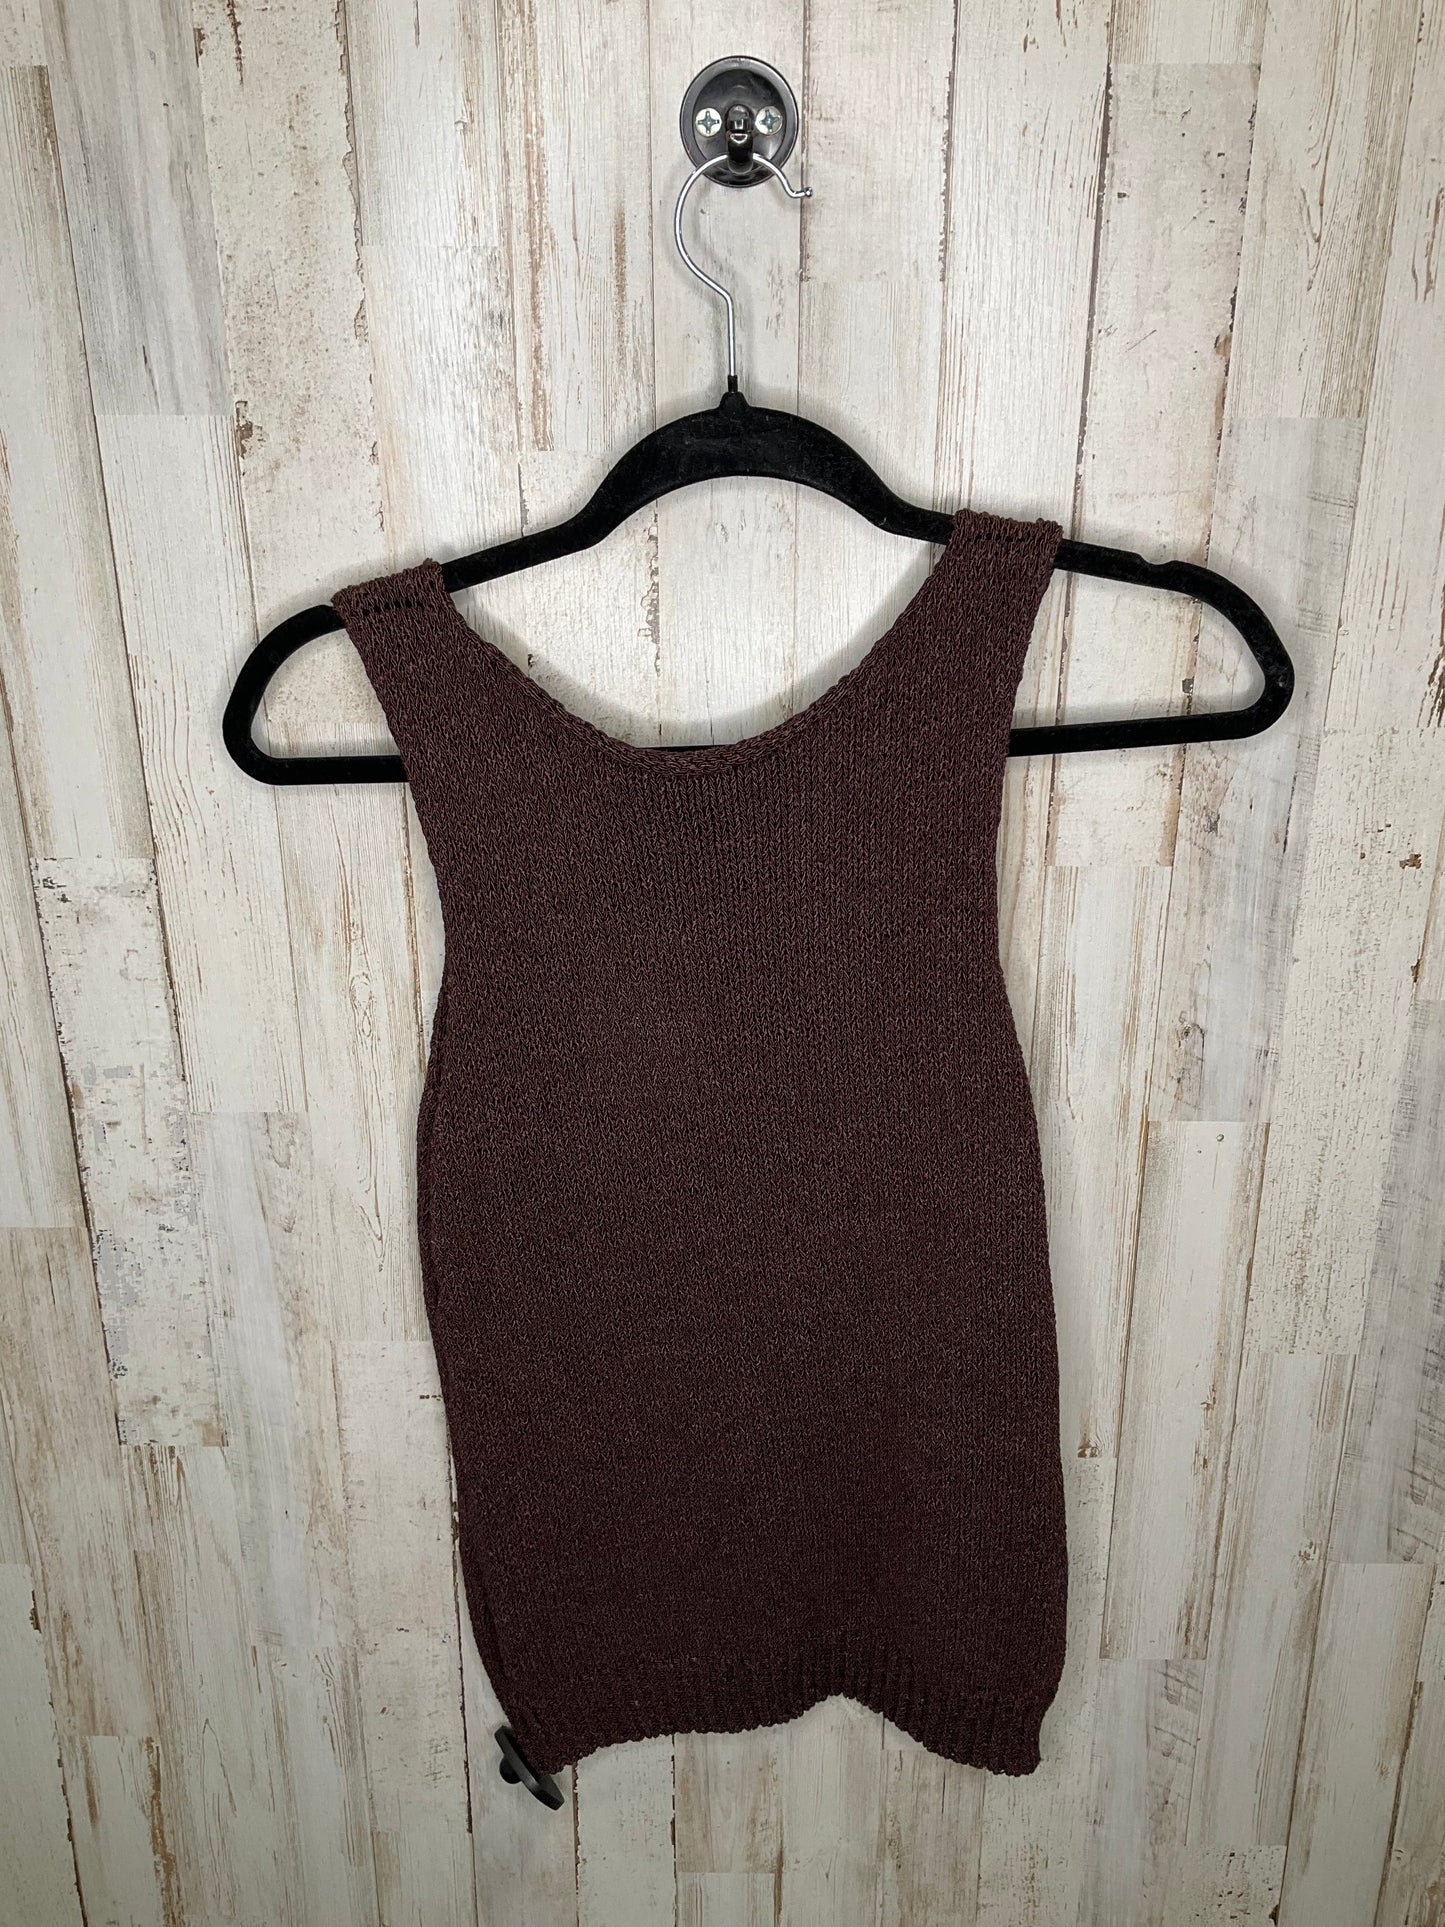 Top Sleeveless By Theory  Size: S